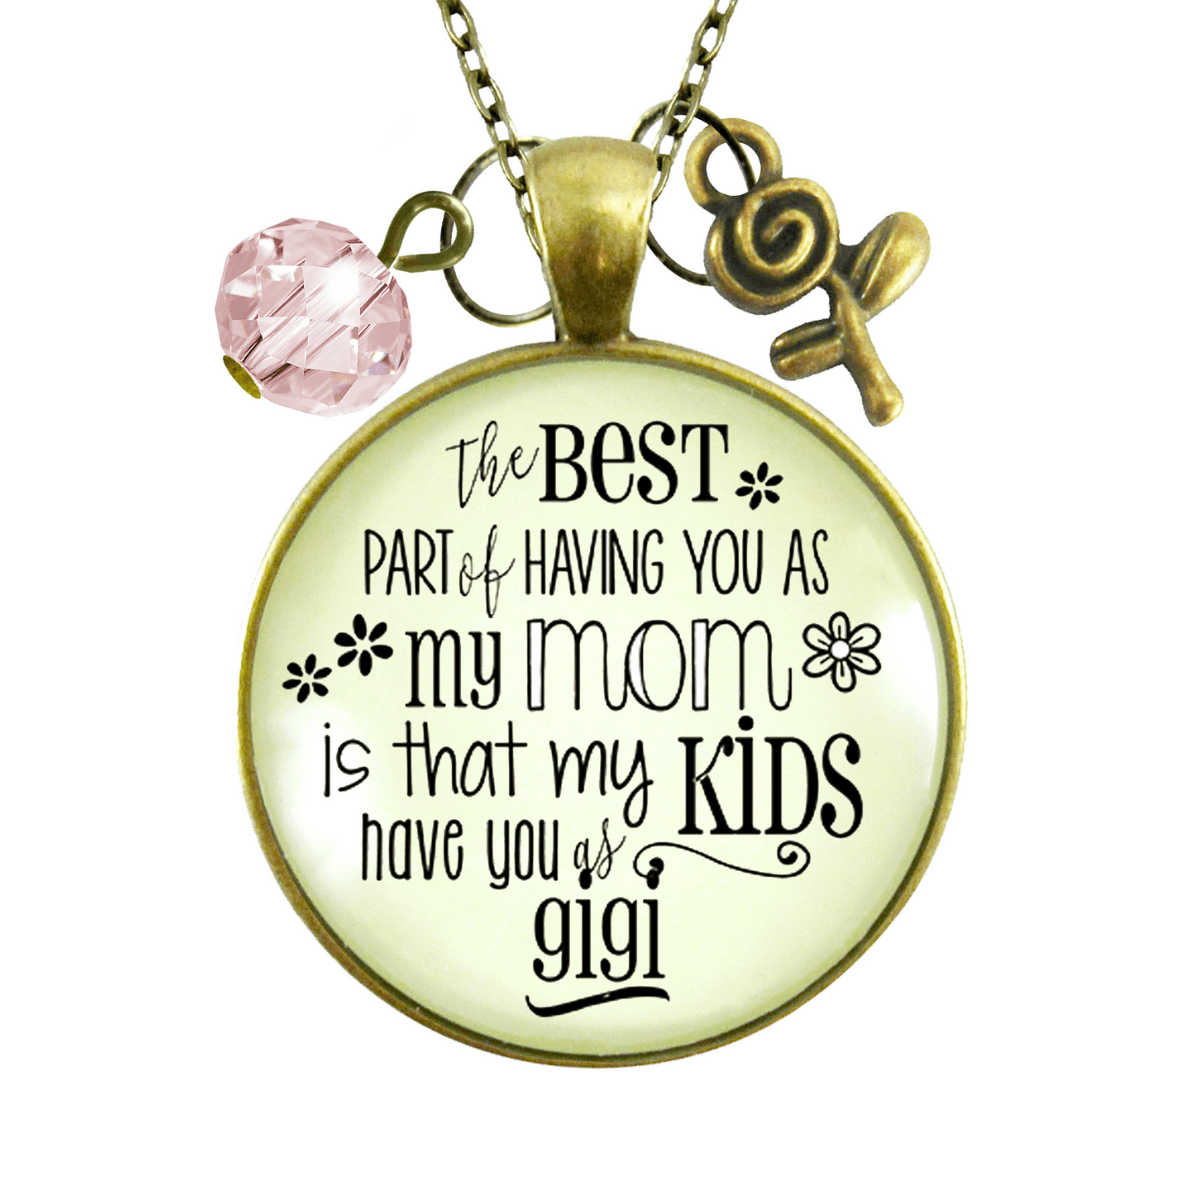 Gutsy Goodness Gigi Necklace Best Part of You Mom Kids Have Grandma Jewelry Gift From Daughter - Gutsy Goodness Handmade Jewelry;Gigi Necklace Best Part Of You Mom Kids Have Grandma Jewelry Gift From Daughter - Gutsy Goodness Handmade Jewelry Gifts